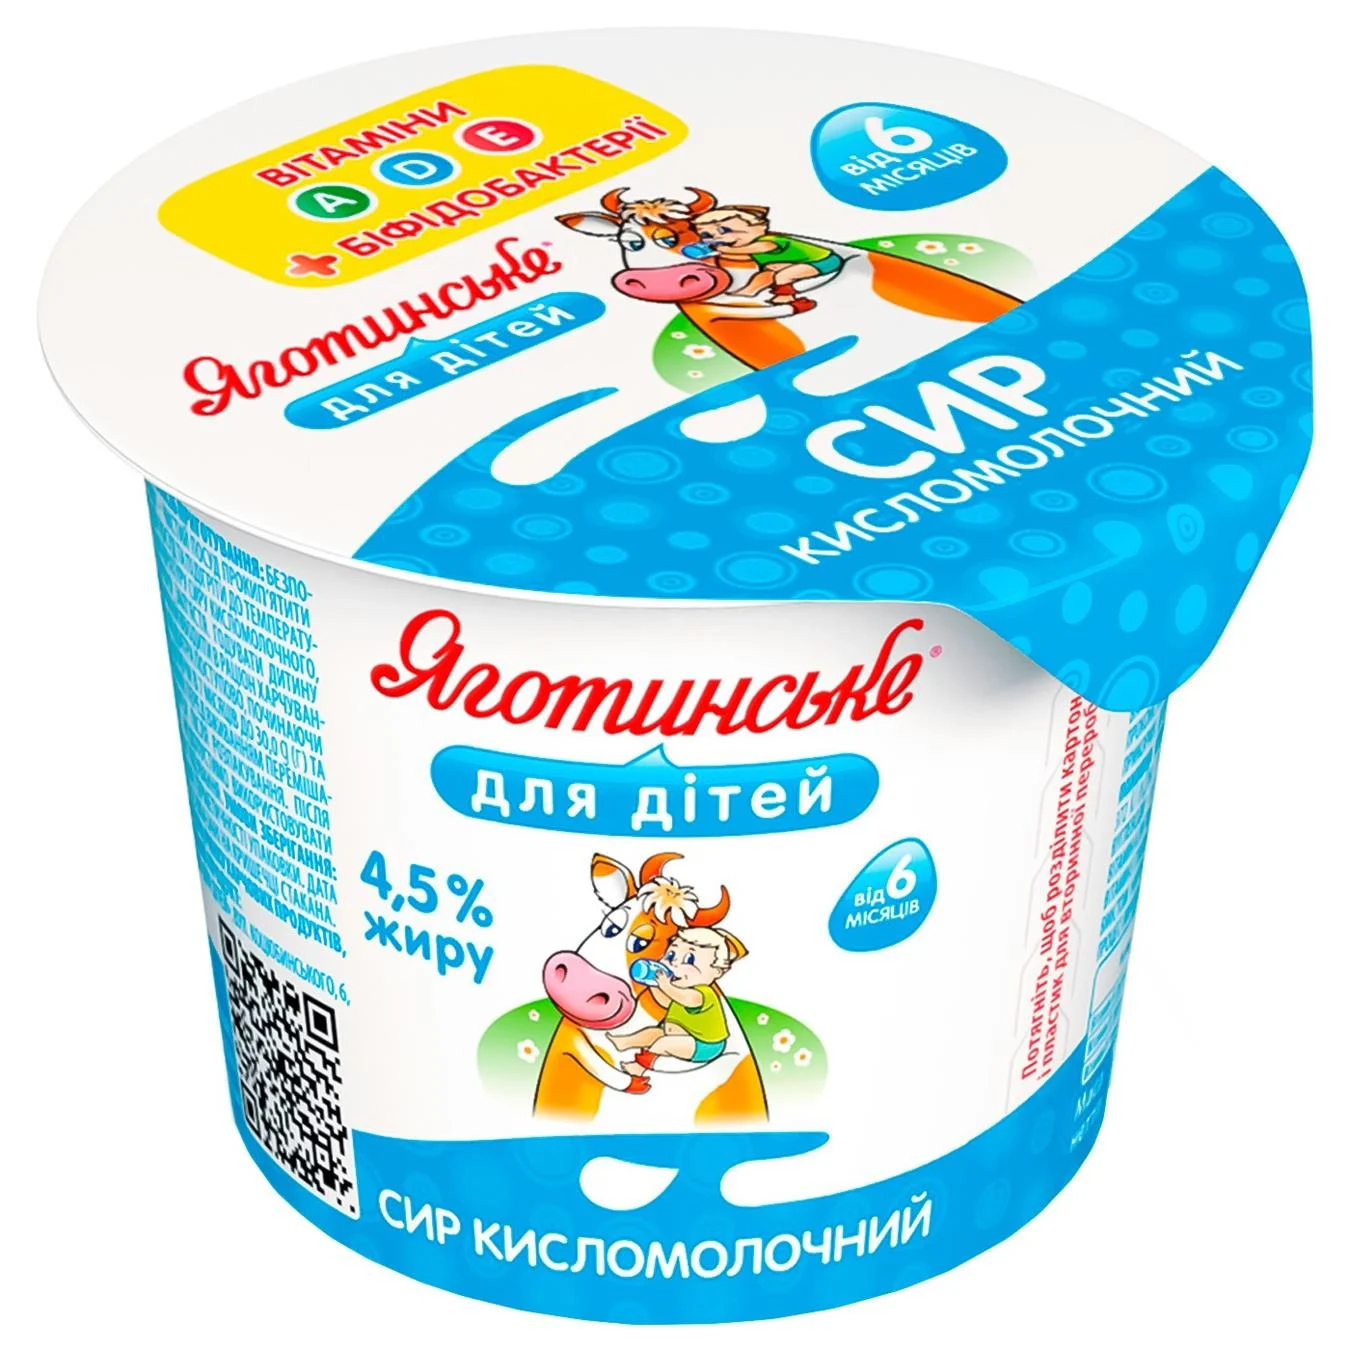 Yagotynske For Children from 6 Months Cottage Cheese 4,5% 100g